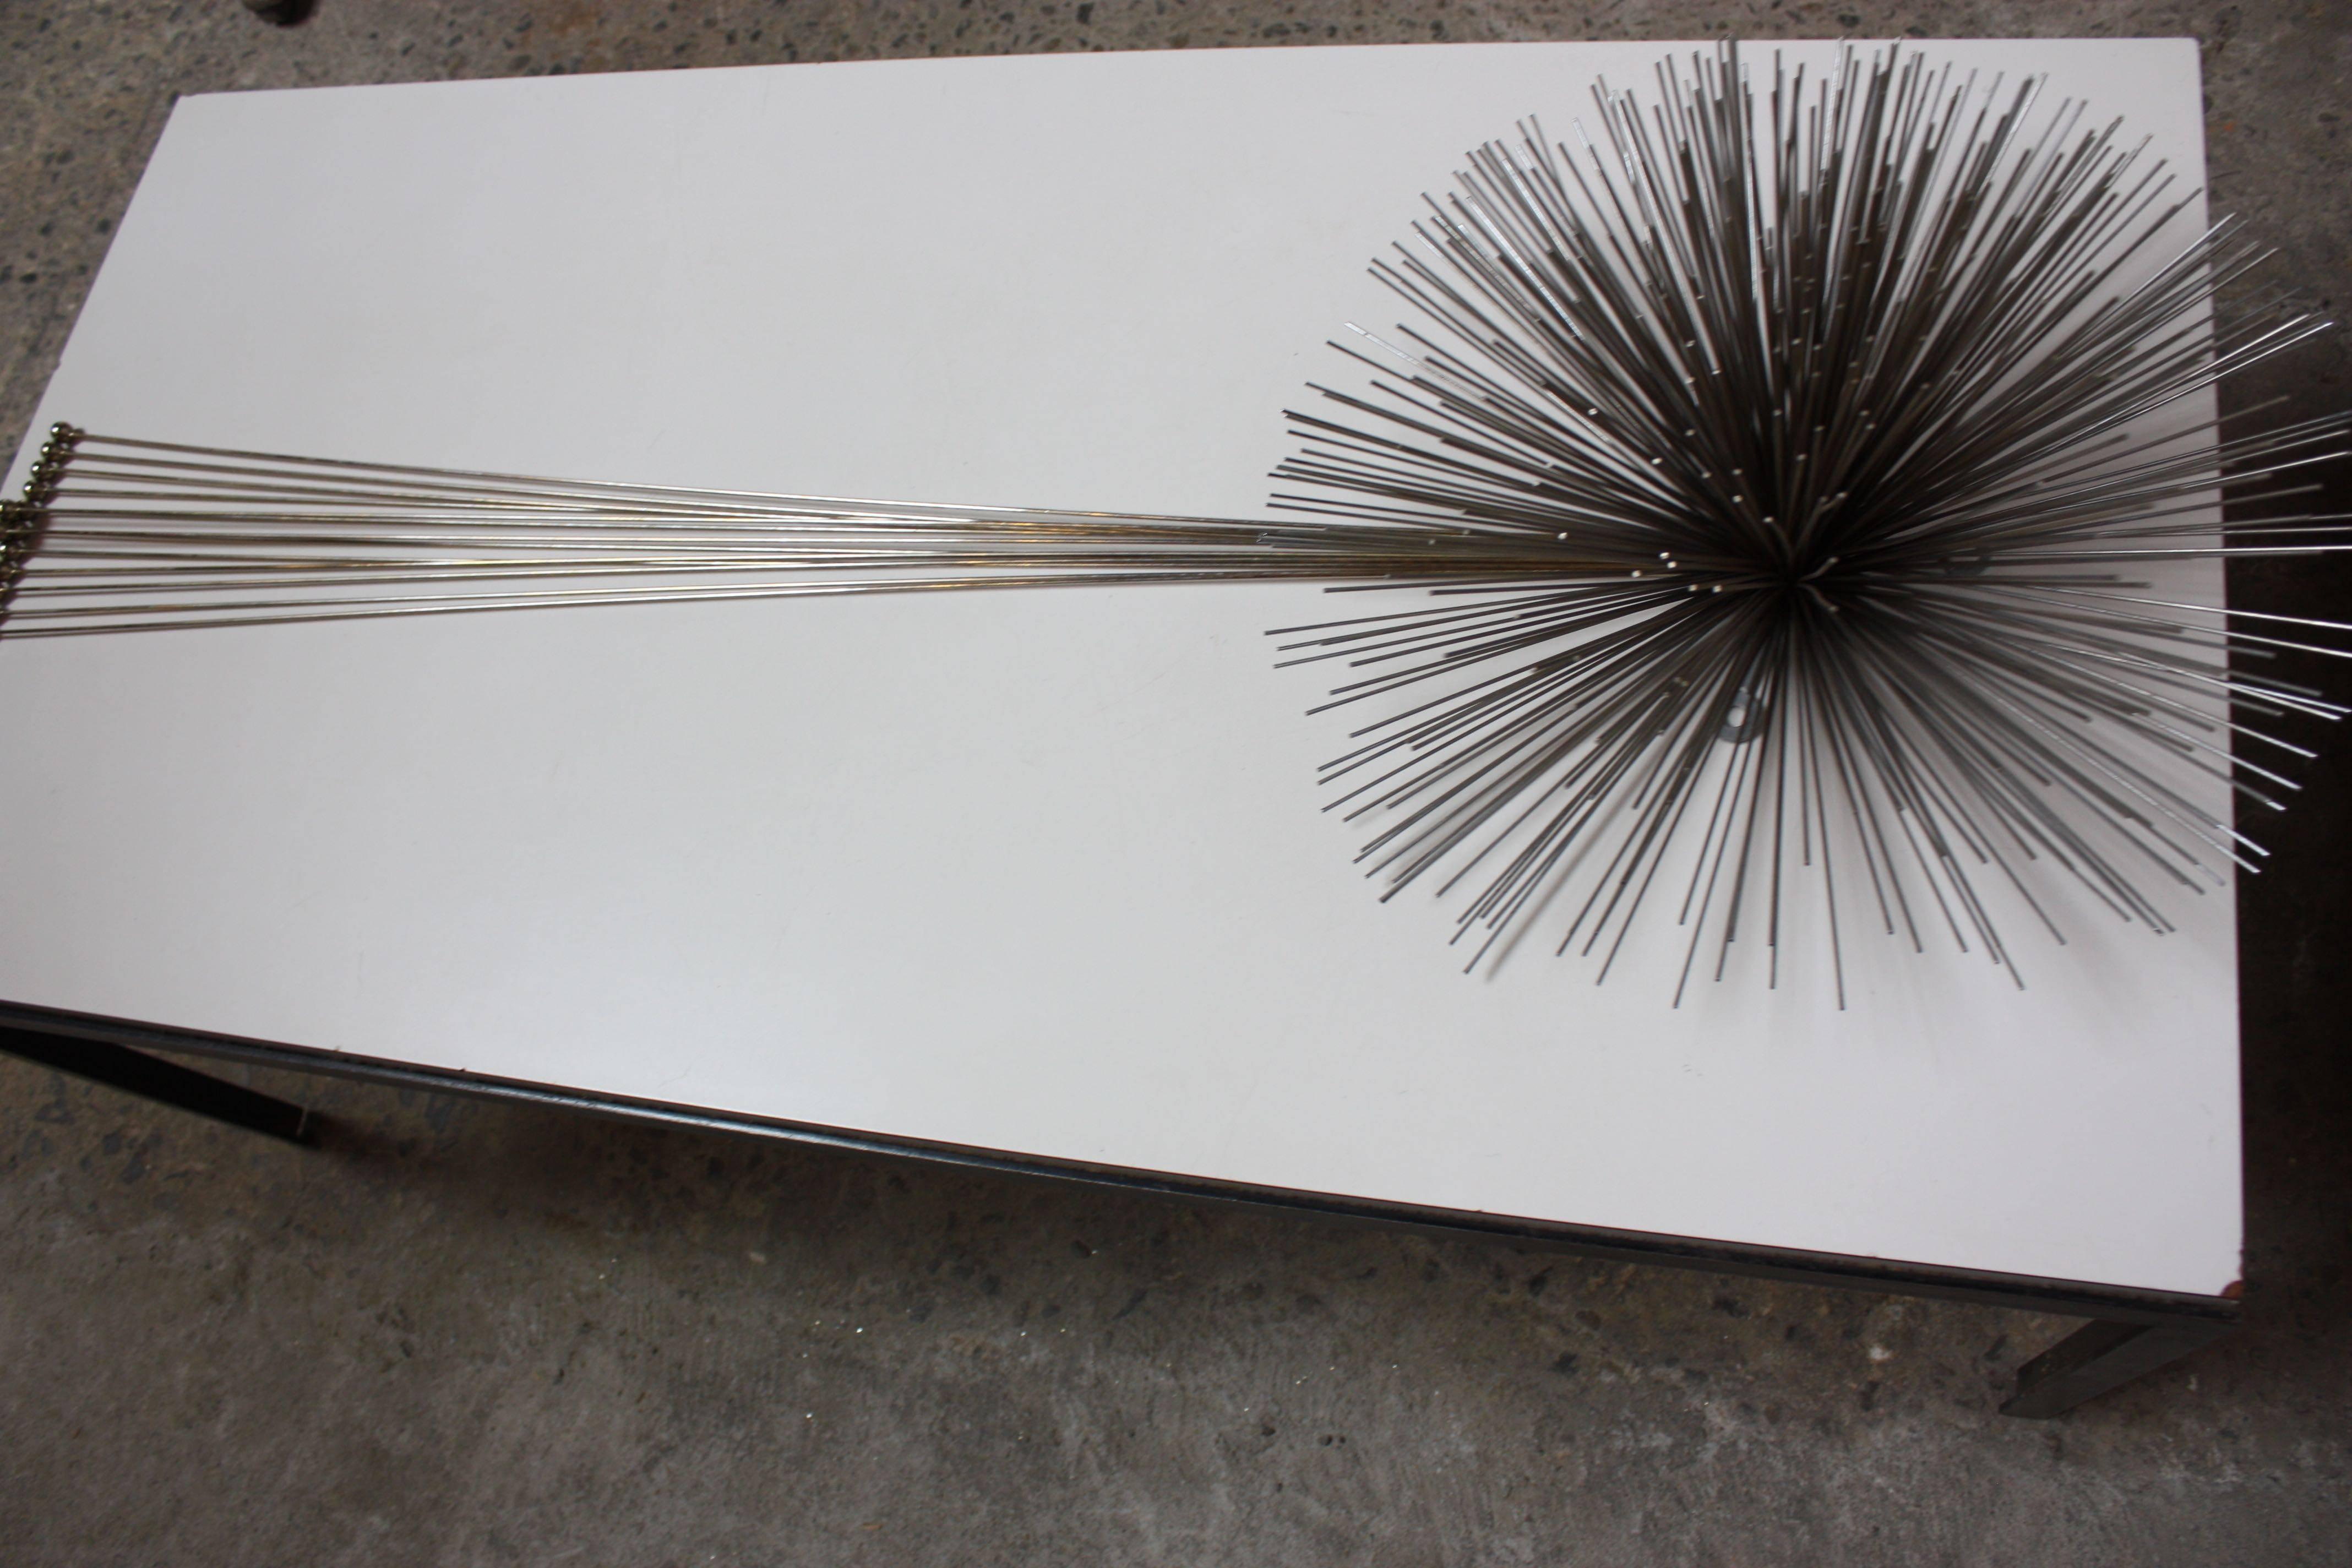 American Mixed Metal Curtis Jere Elongated 'Urchin' Wall Sculpture For Sale